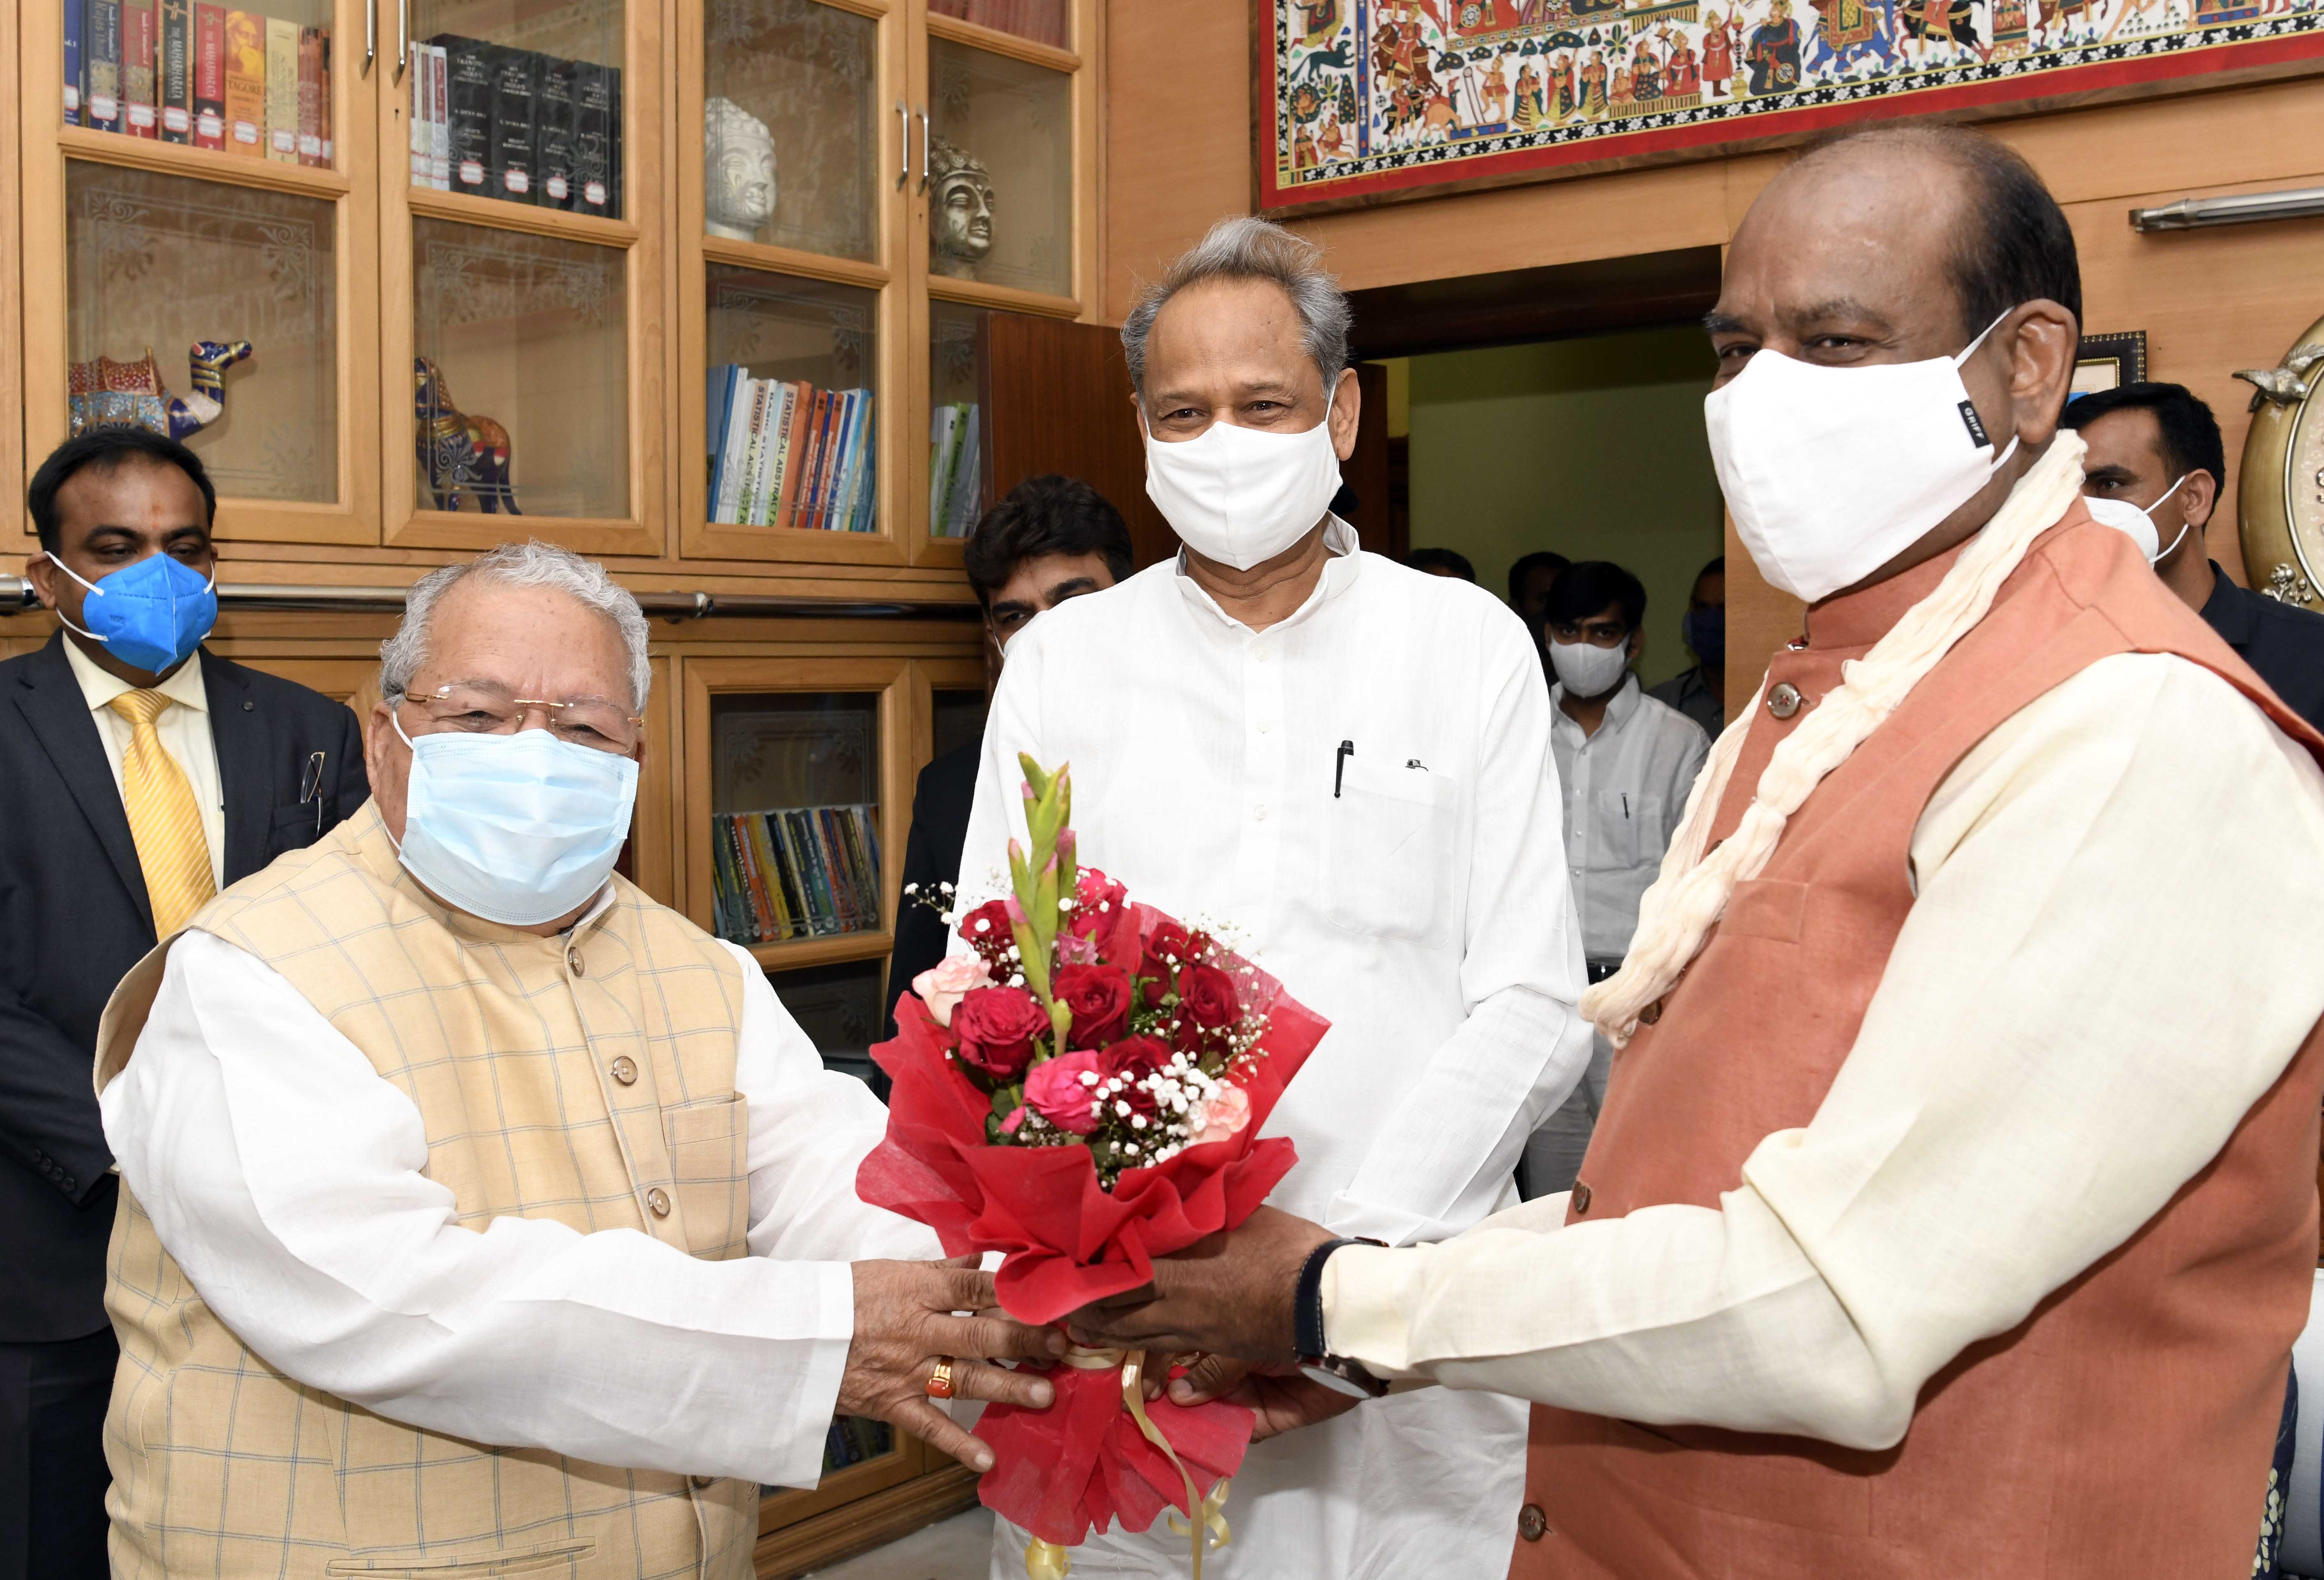 Hon'ble Speaker of Lok Sabha Shri Om Birla and Hon'ble Chief Minister of Rajasthan Shri Ashok Gehlot meets Hon'ble Governor on his Birthday and wished him healthy and long life  